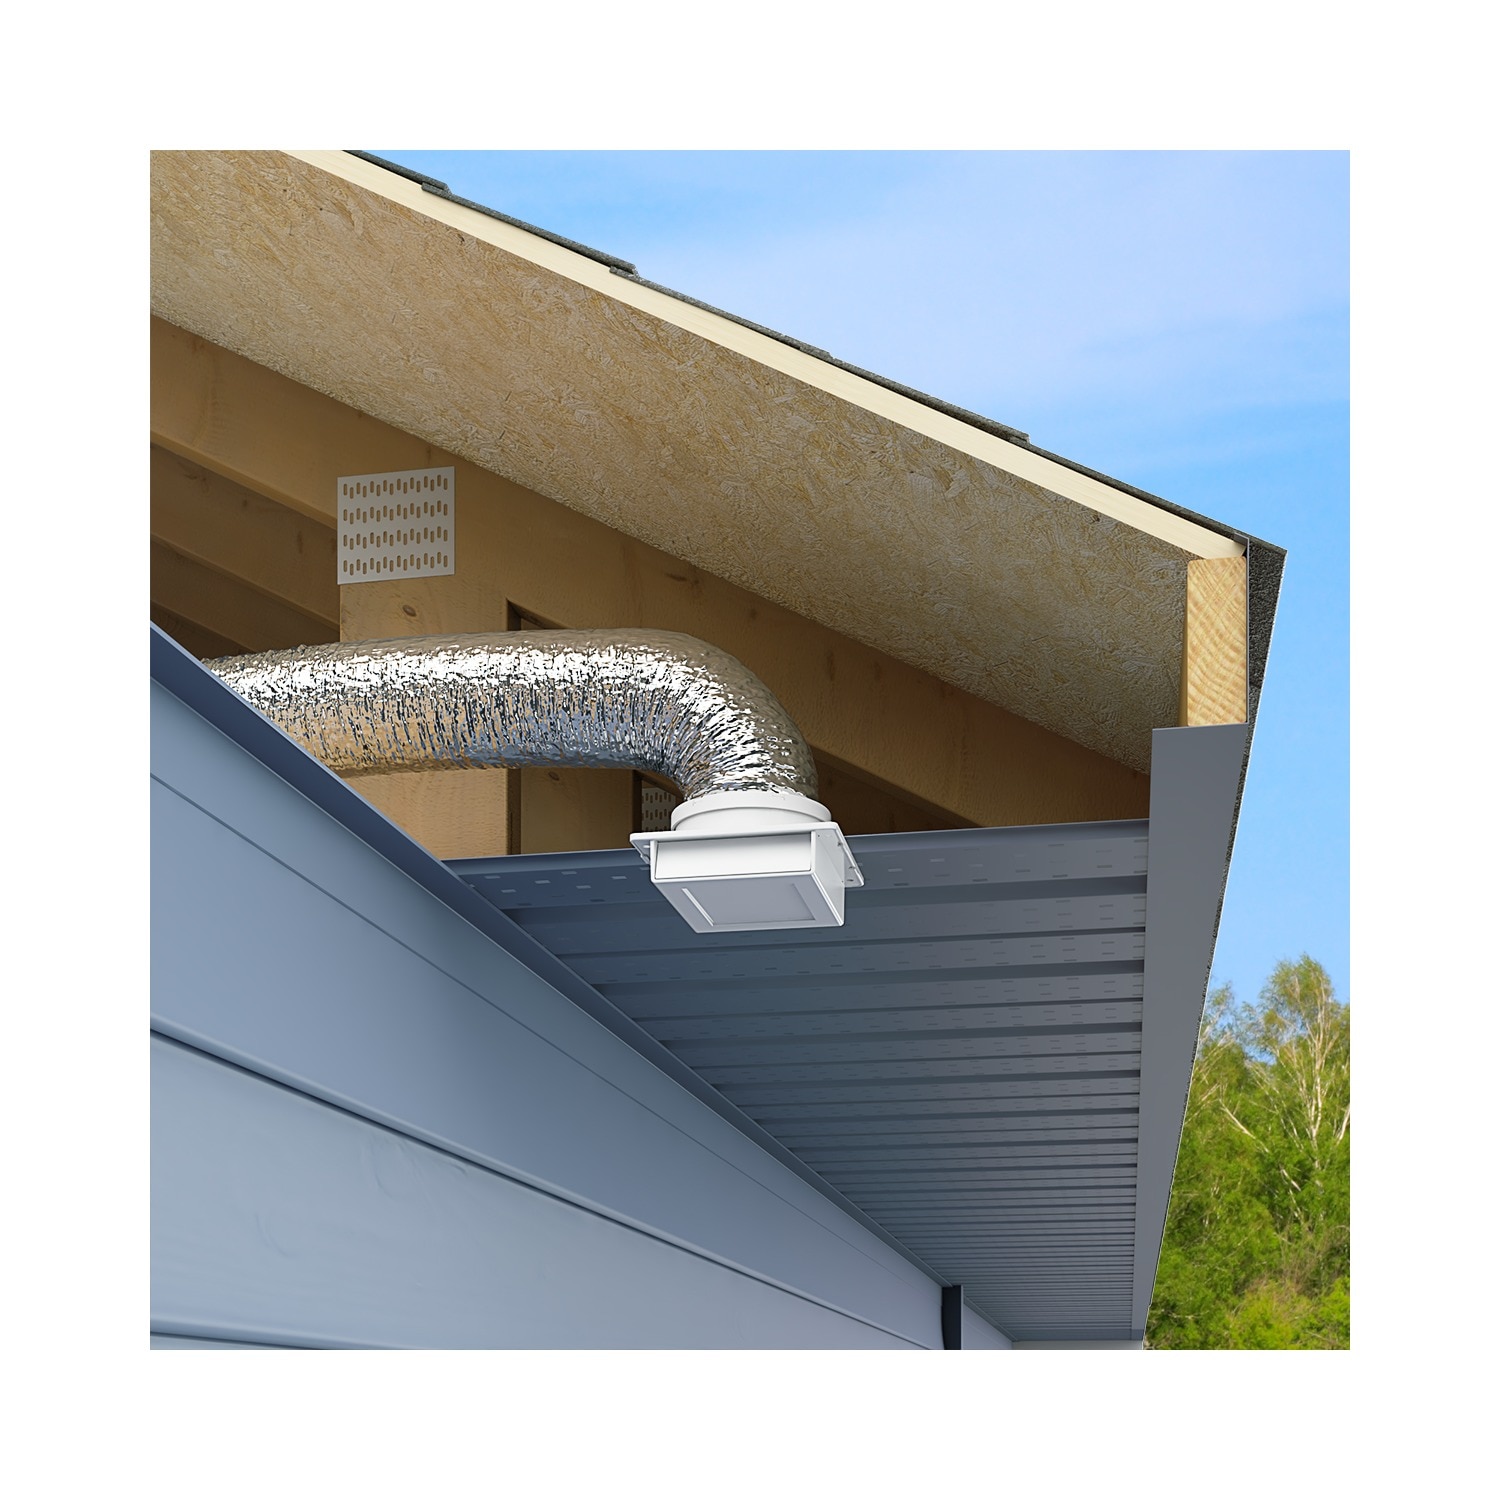 IMPERIAL 8-in x 300-in Insulated Polyester Flexible Duct R 8 in